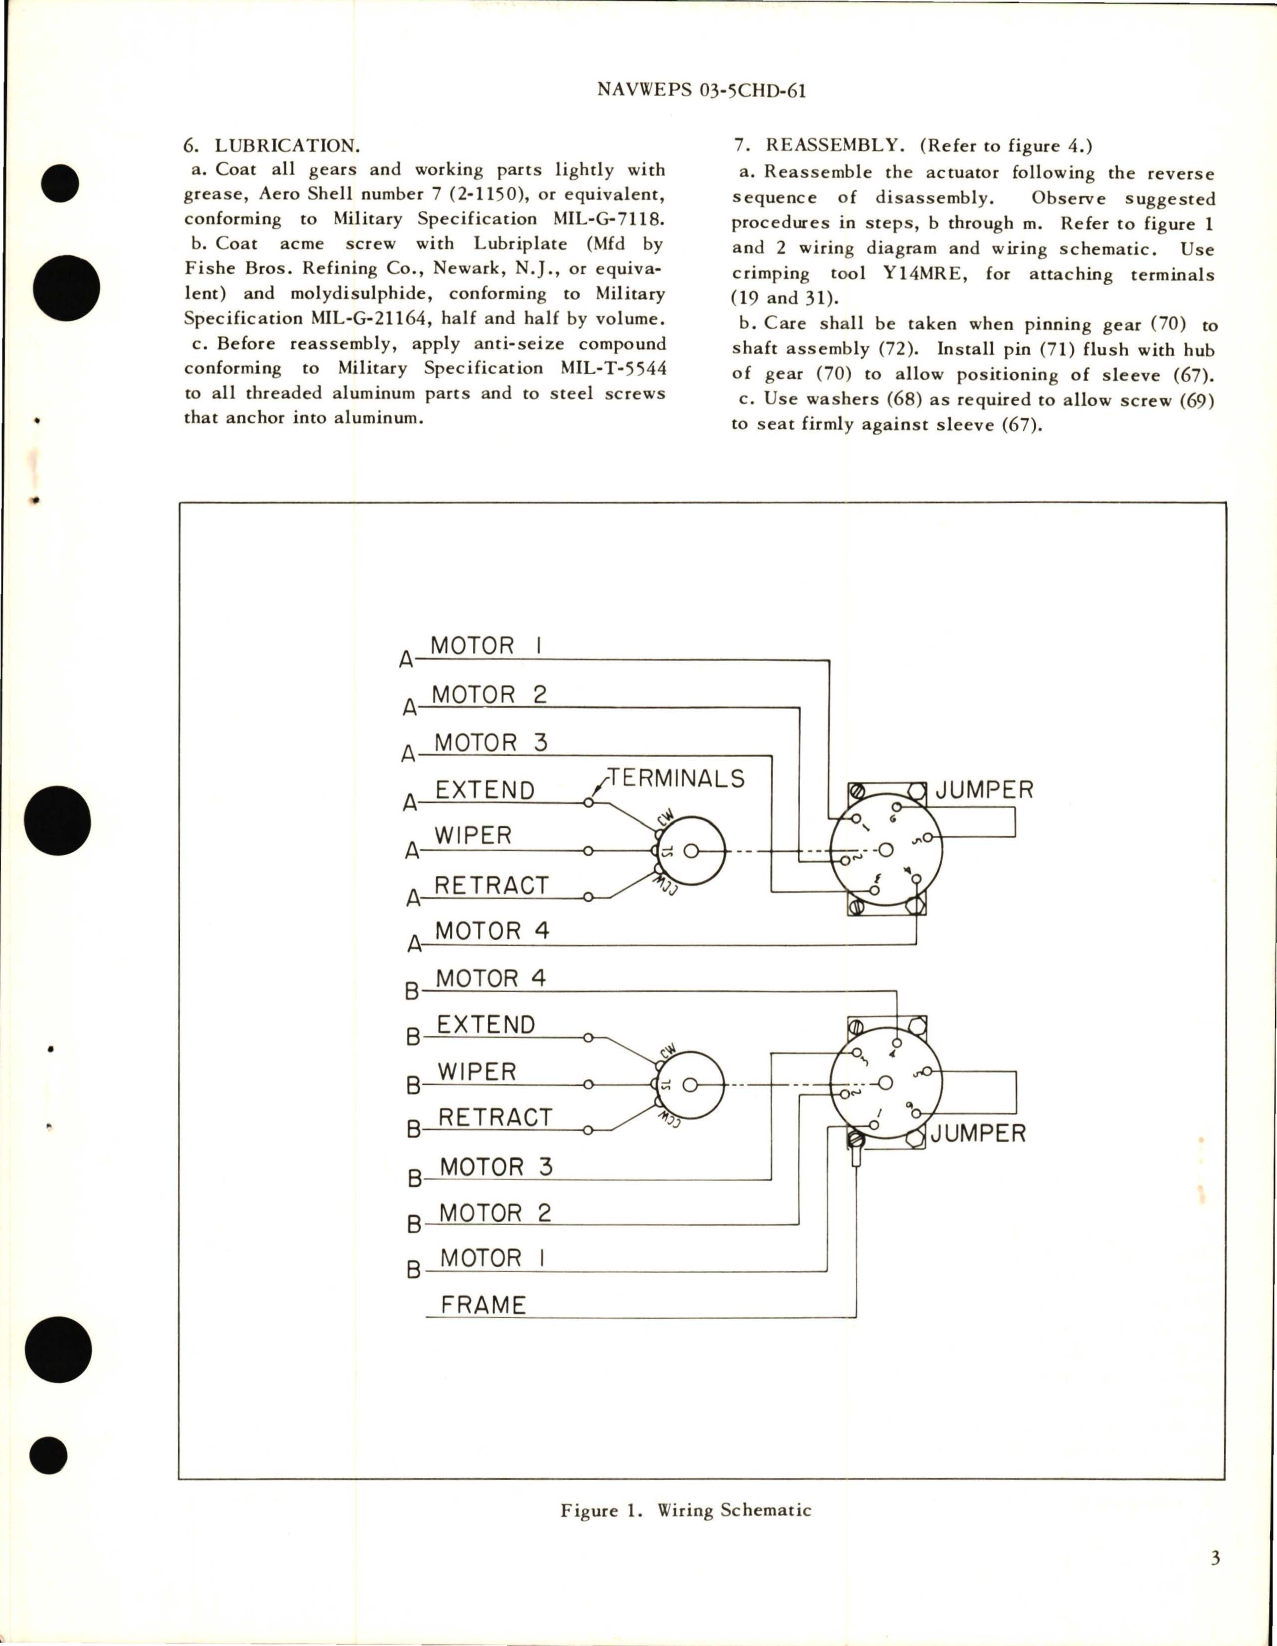 Sample page 5 from AirCorps Library document: Overhaul Instructions with Parts Breakdown for Electro-Mechanical Linear Actuator Model R-1501 and R-1501M1